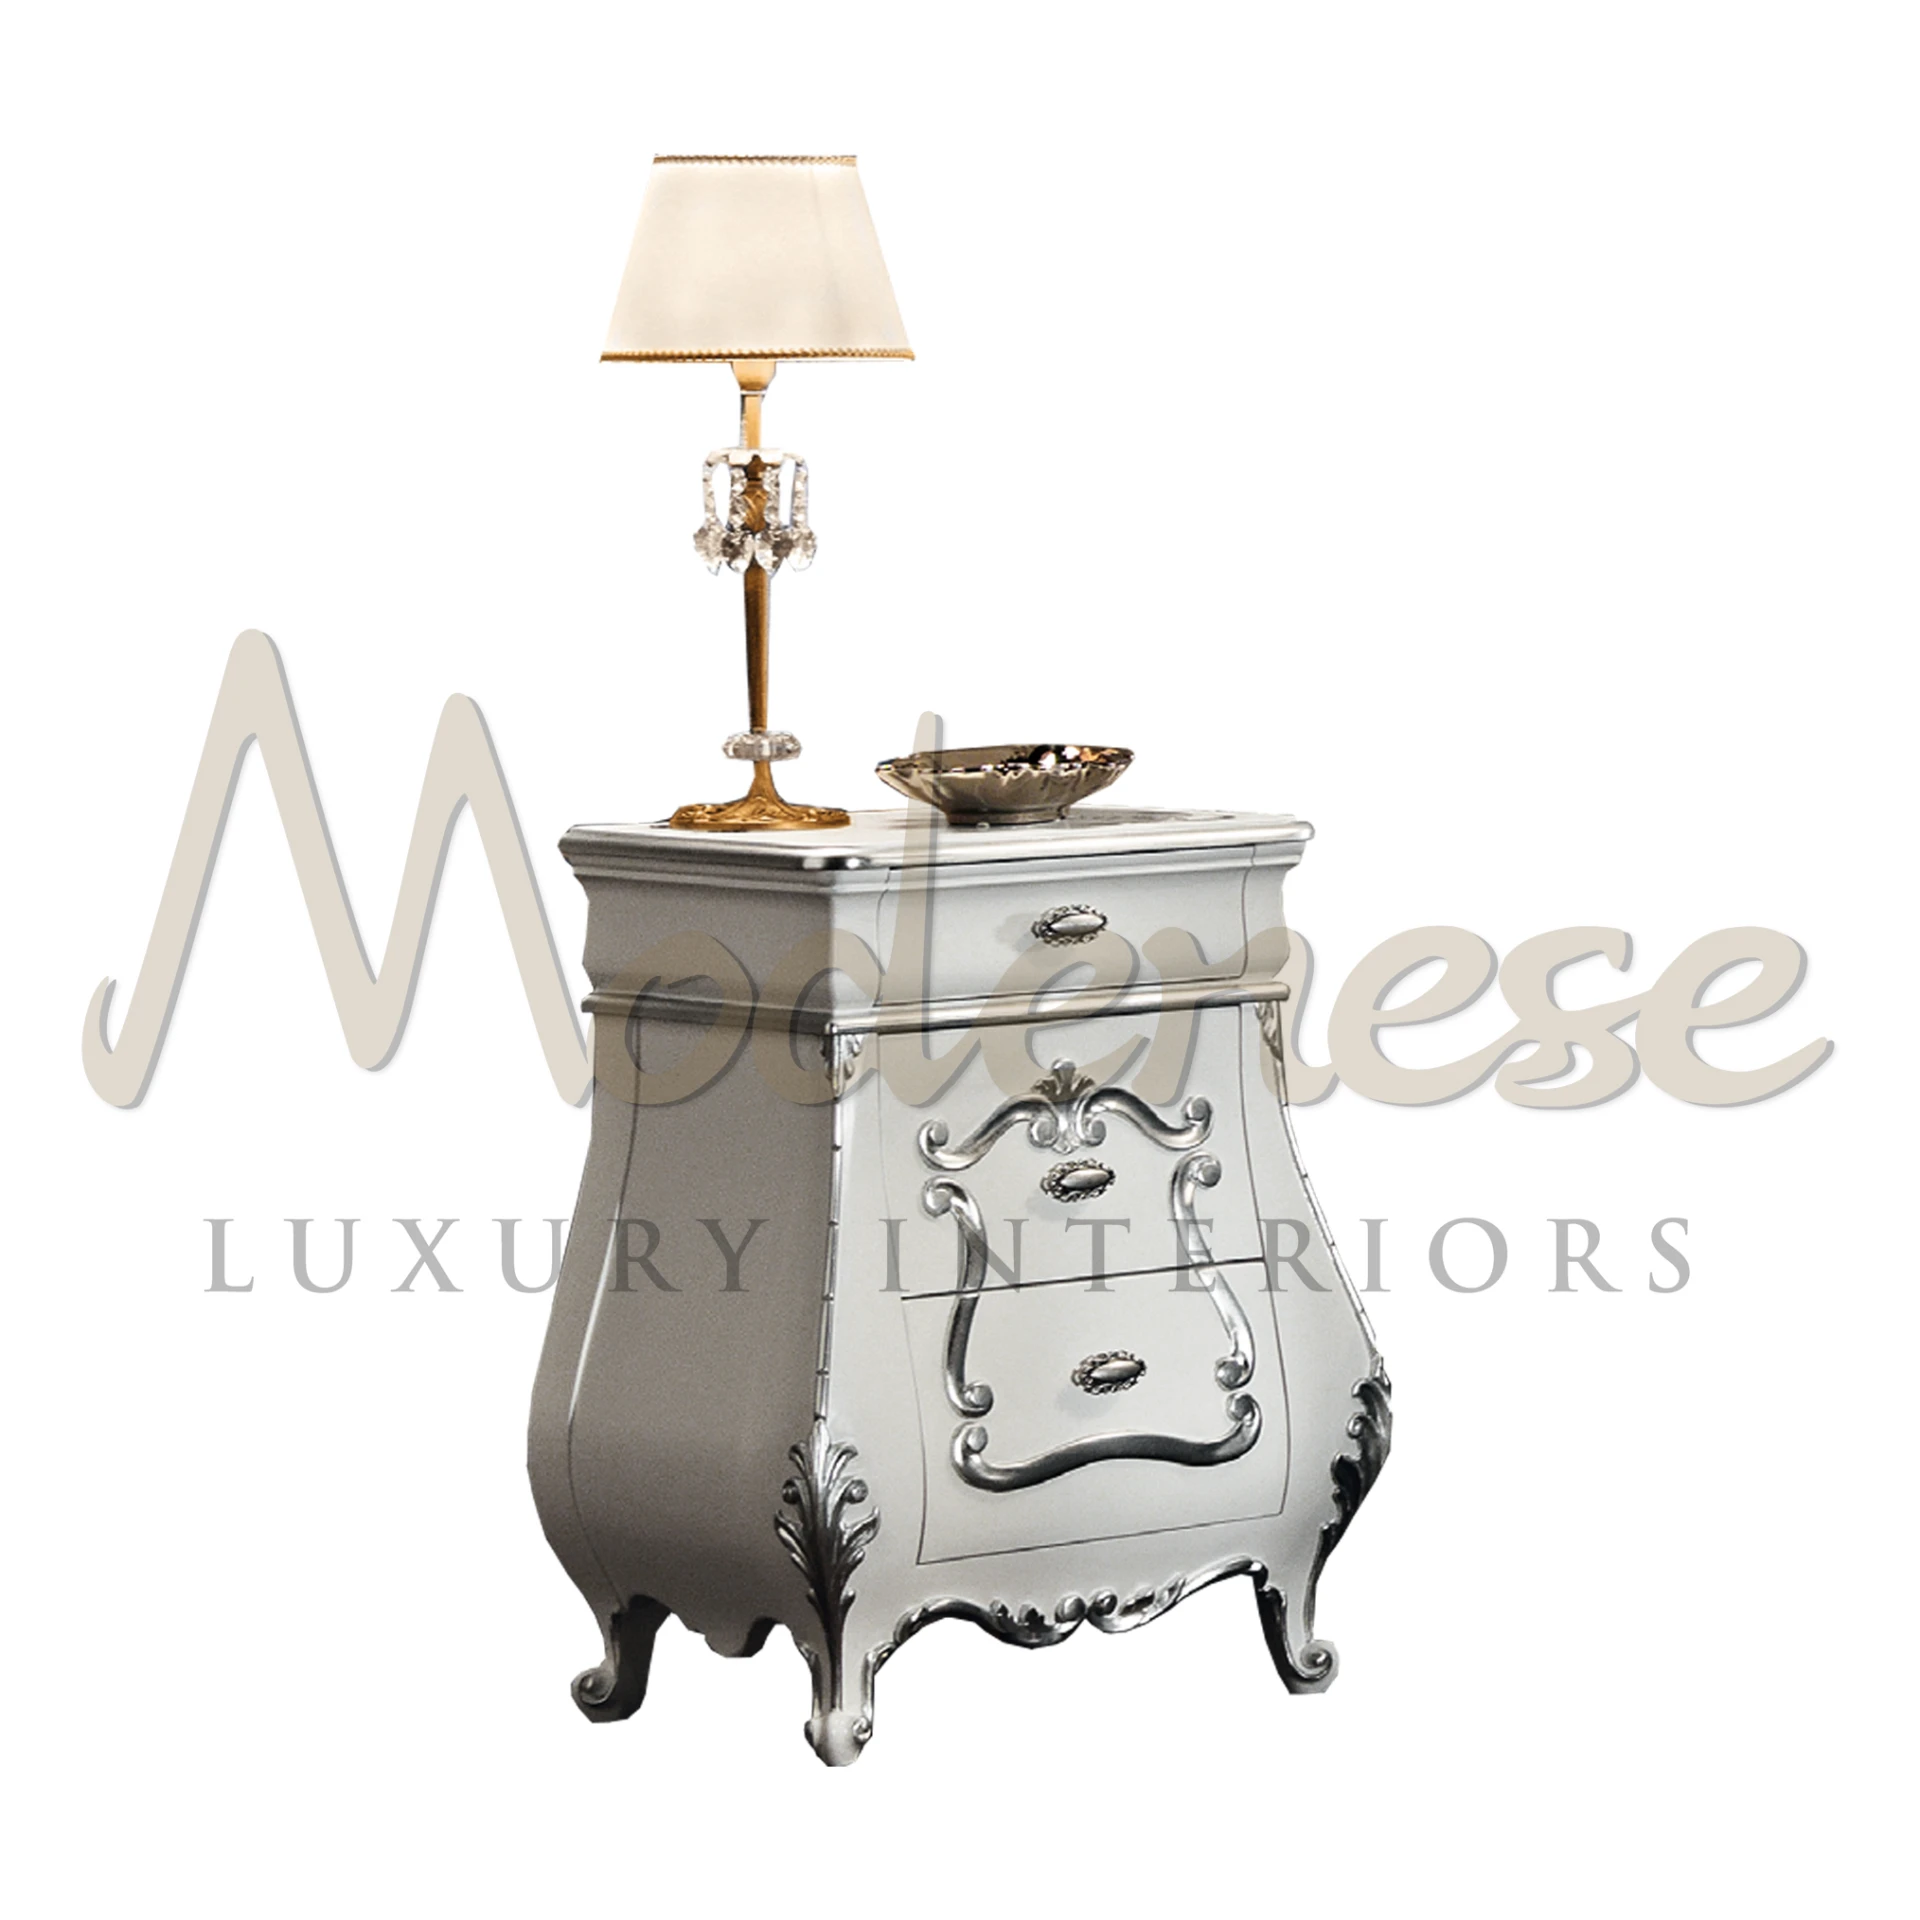 Ornate silver nightstand with baroque design details, accompanied by a gold and crystal table lamp with a cream shade, and a decorative gold bowl created by Modenese.